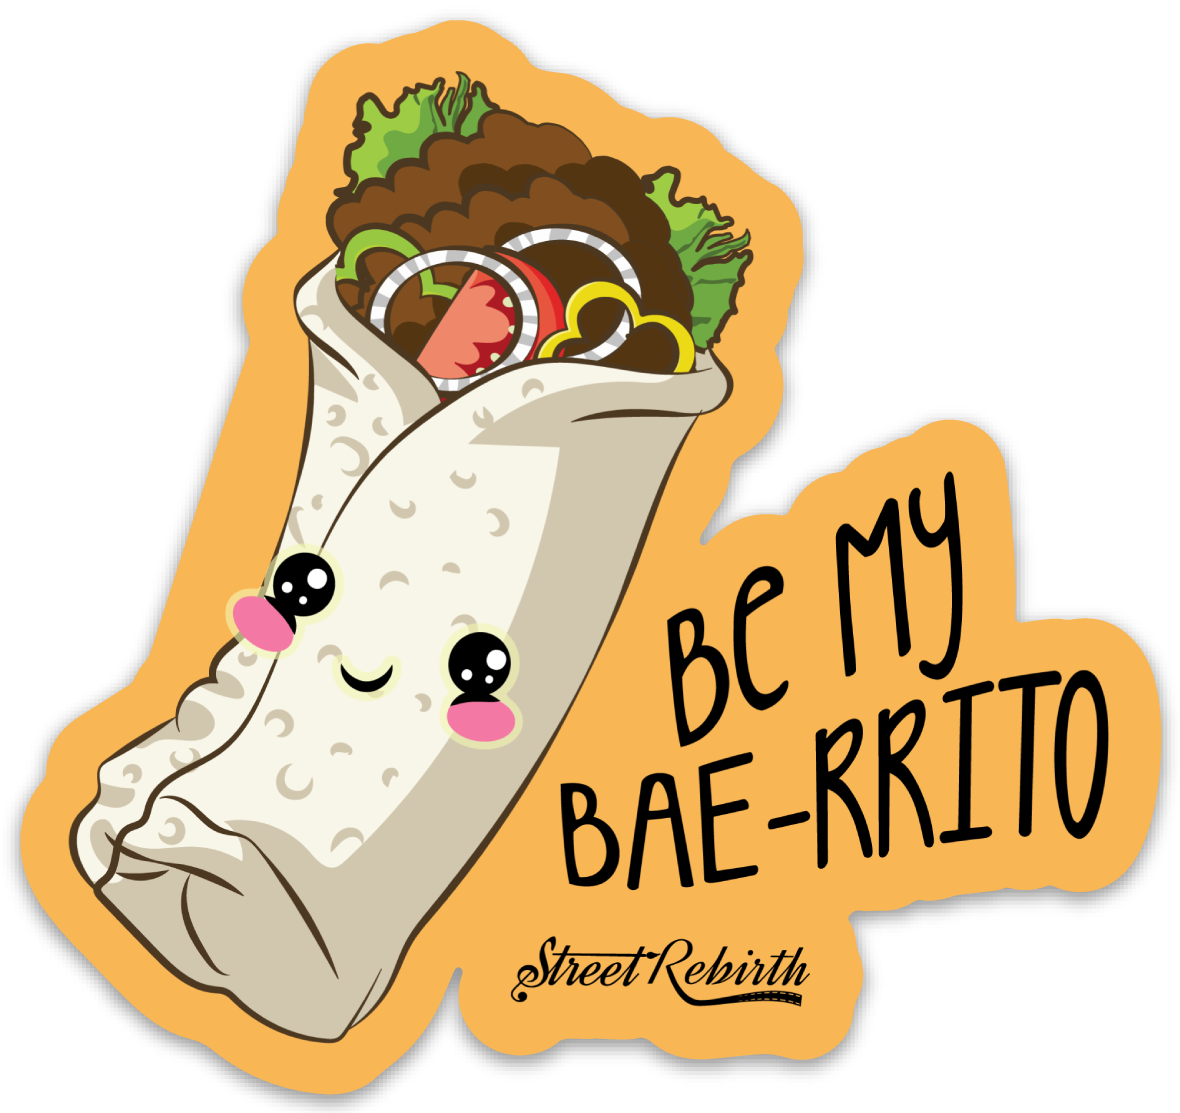 BE MY BAE-RRITO PUN STICKER – ONE 4 INCH WATER PROOF VINYL STICKER – FOR HYDRO FLASK, SKATEBOARD, LAPTOP, PLANNER, CAR, COLLECTING, GIFTING